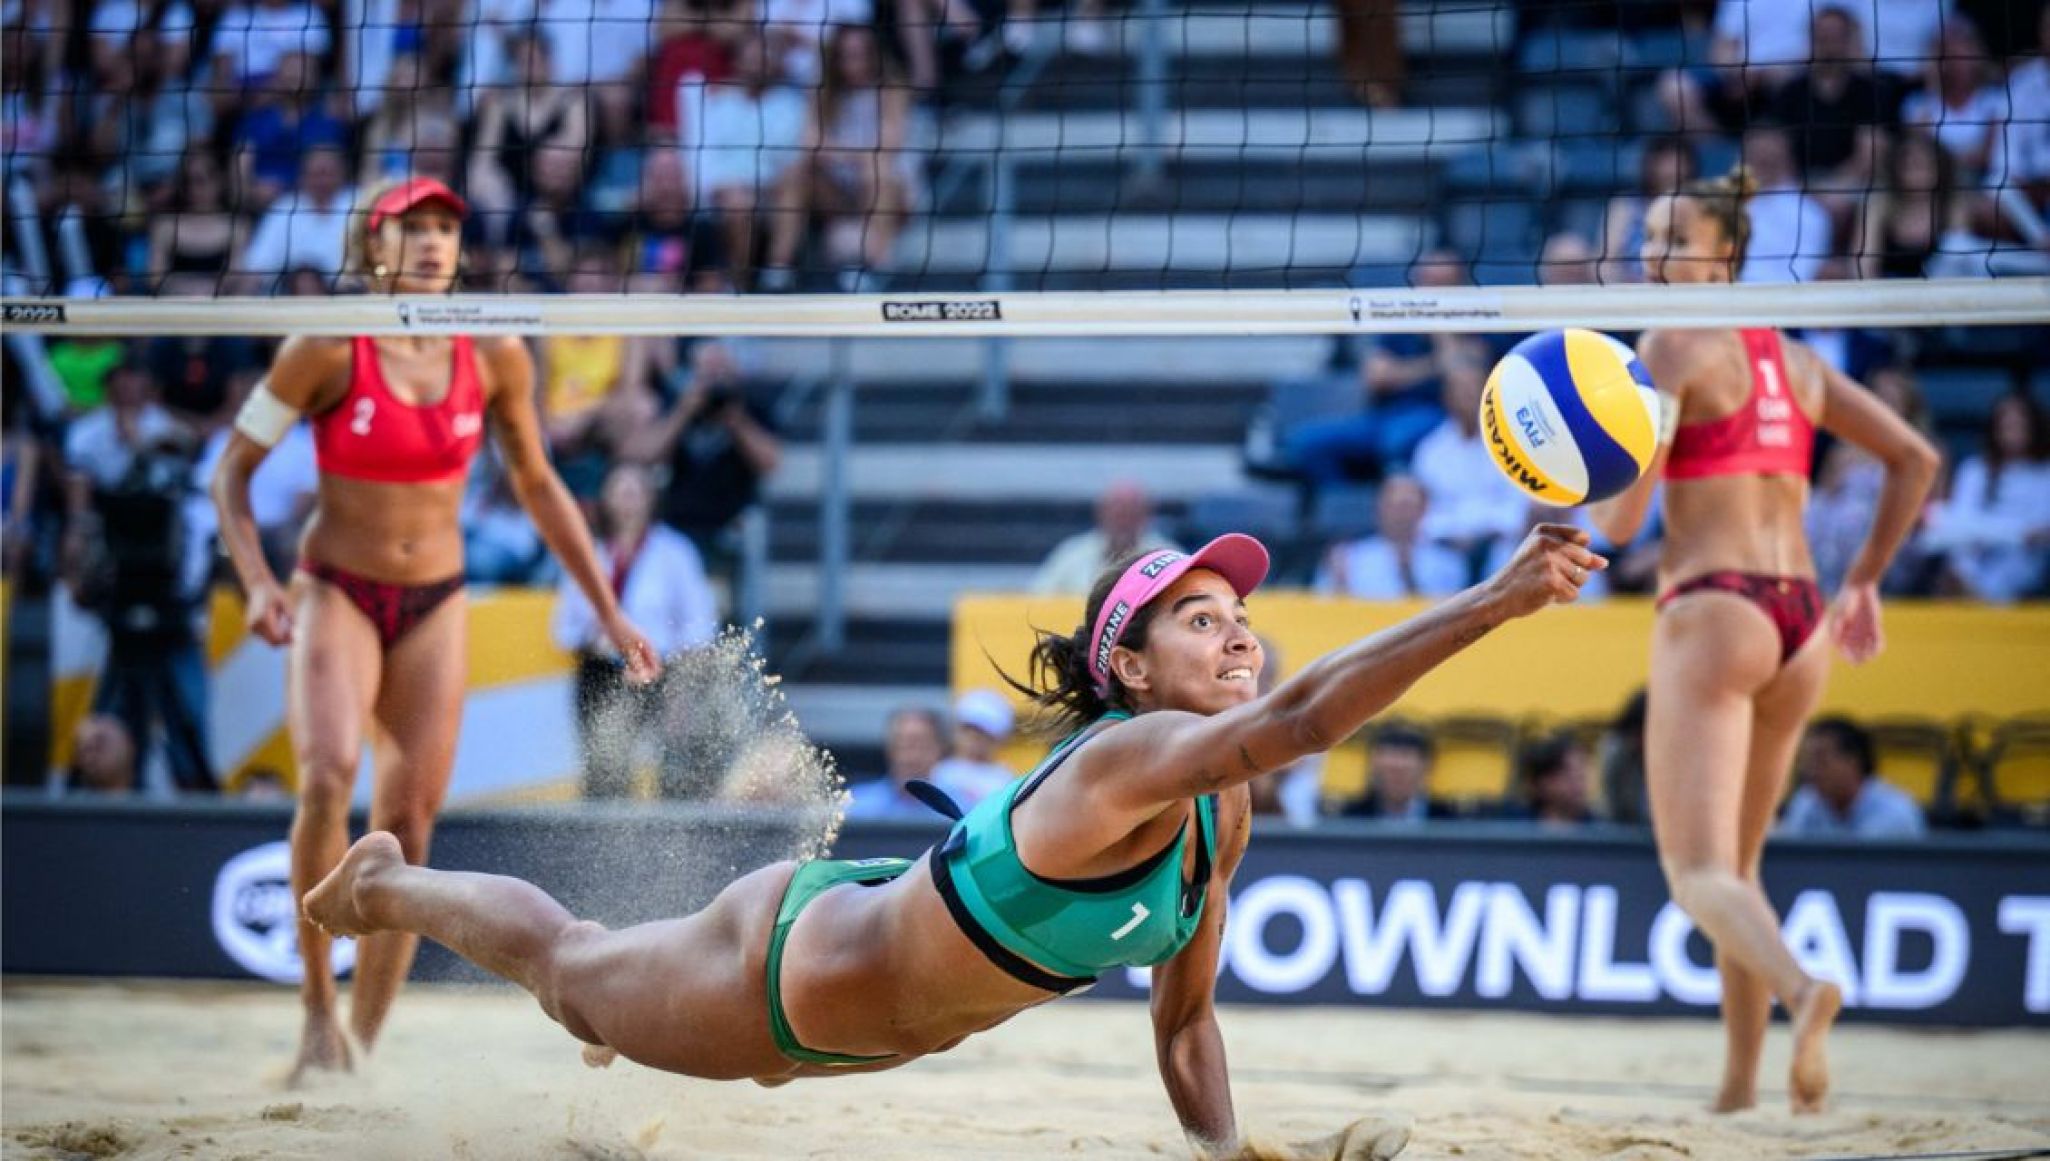 Image of a match at the Beach Volleyball World Championships Rome 2022 